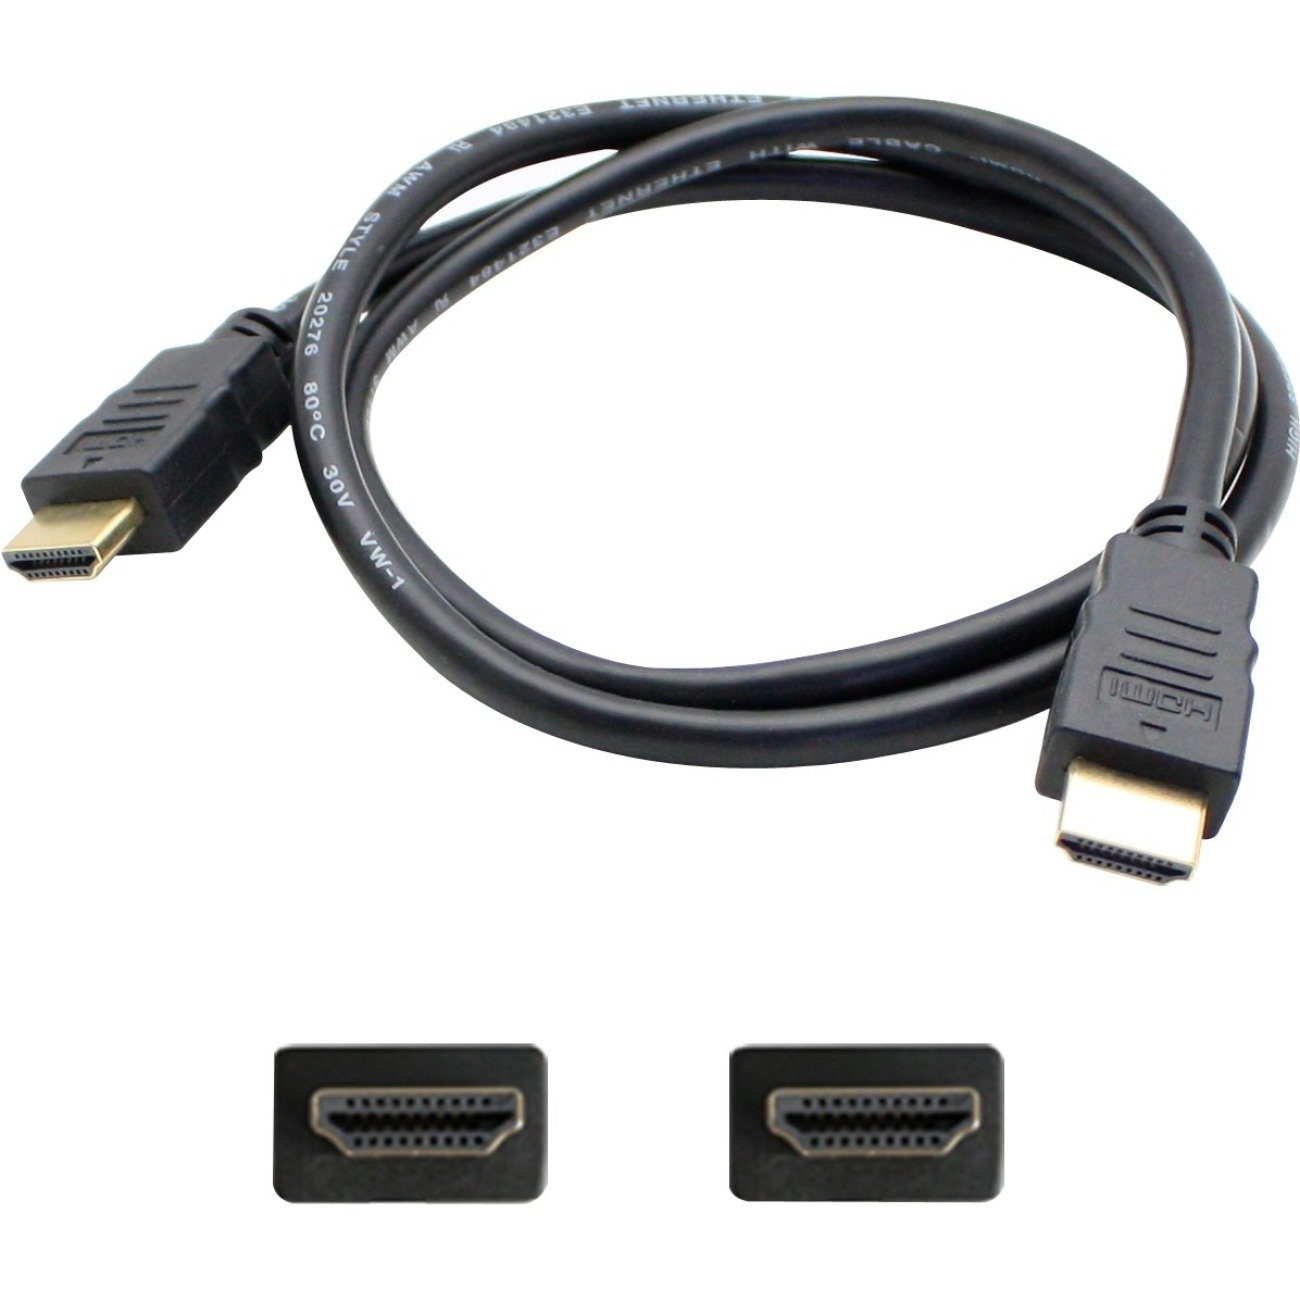 AddOn 5-Pack of 10ft HDMI Male to Male Black Cables